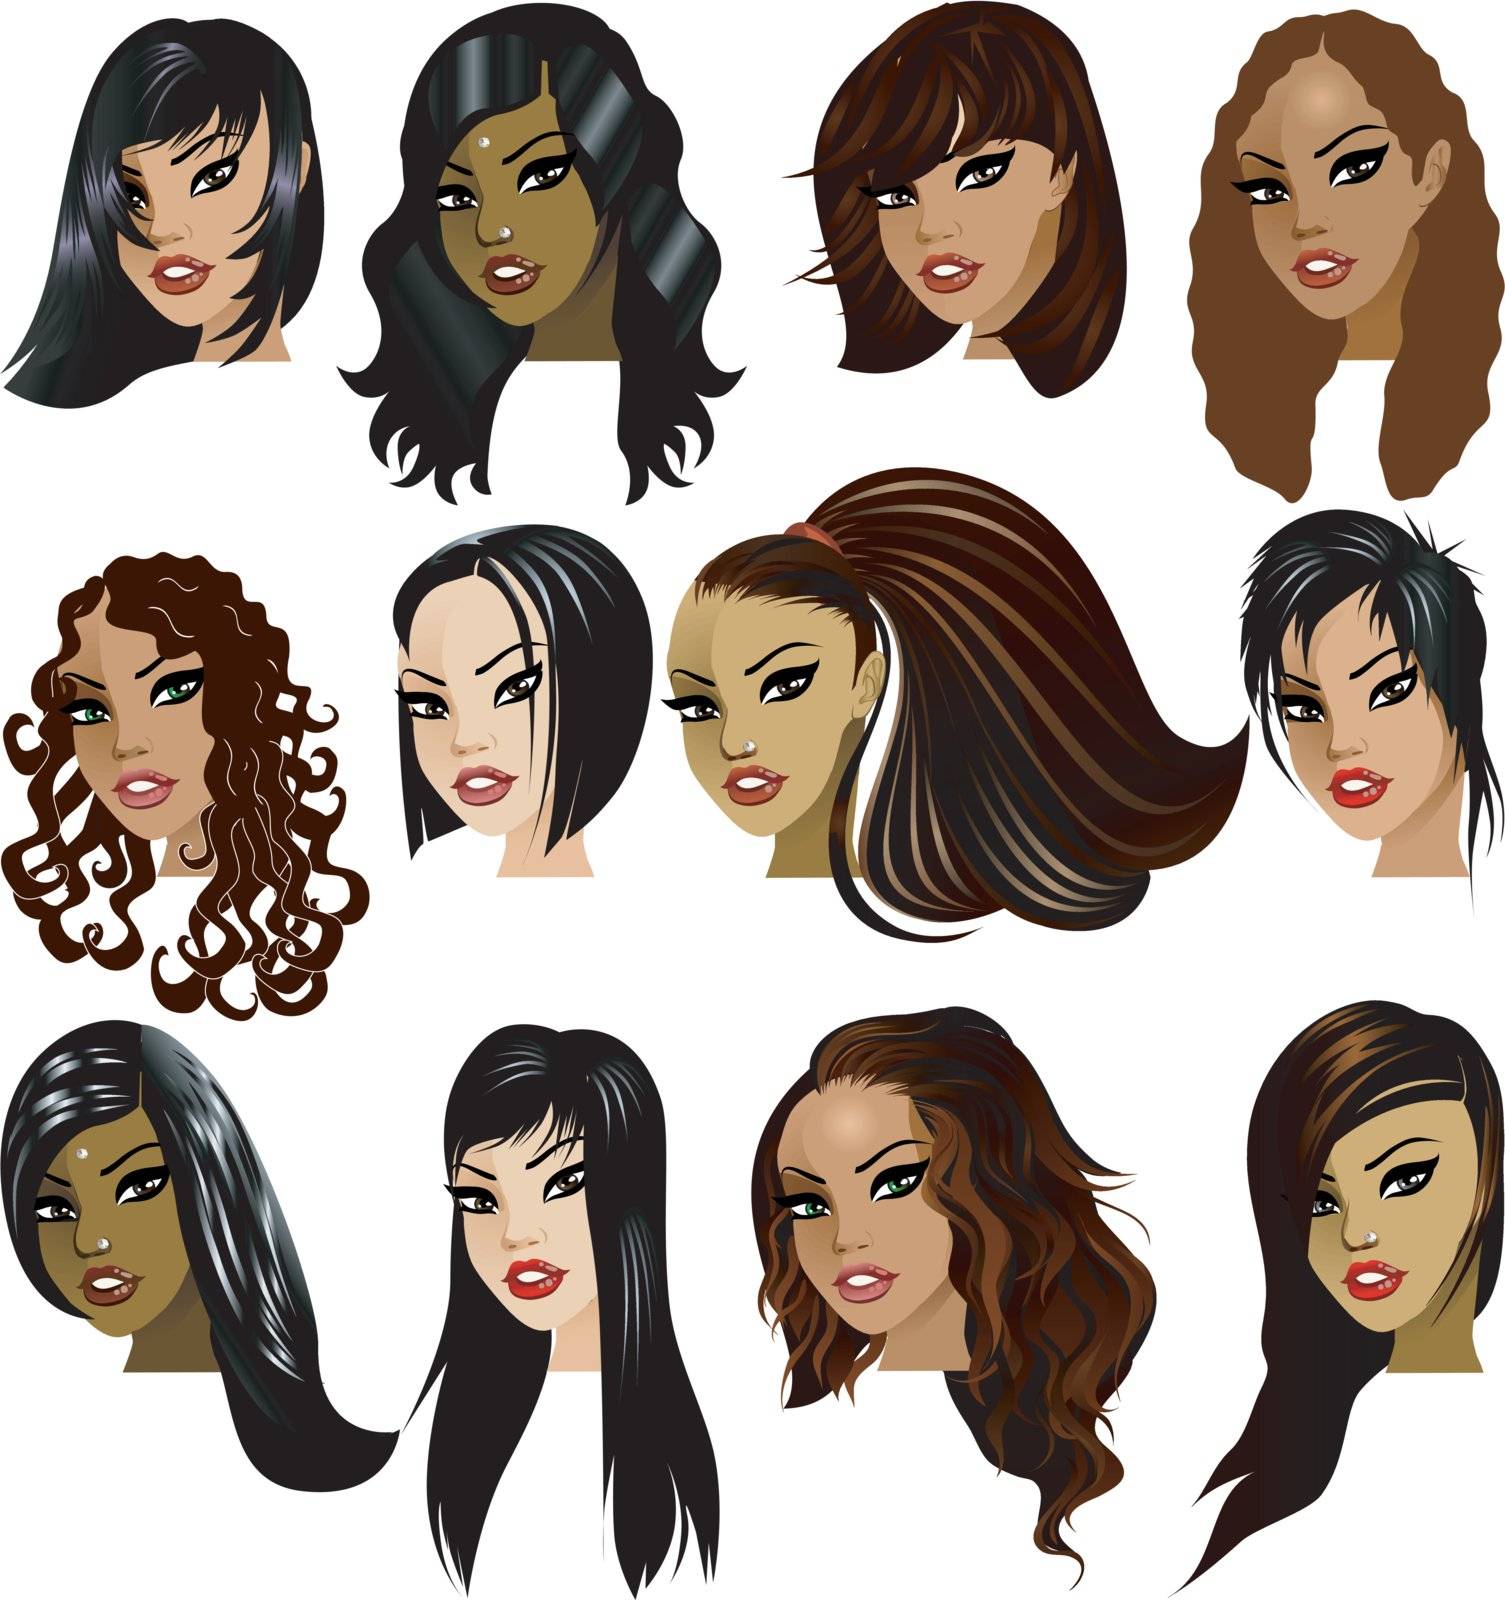 Vector Illustration of Indian, Asian, Oriental, Middle Eastern and Hispanic Women Faces. Great for avatars, makeup, skin tones or hair styles of dark haired women.